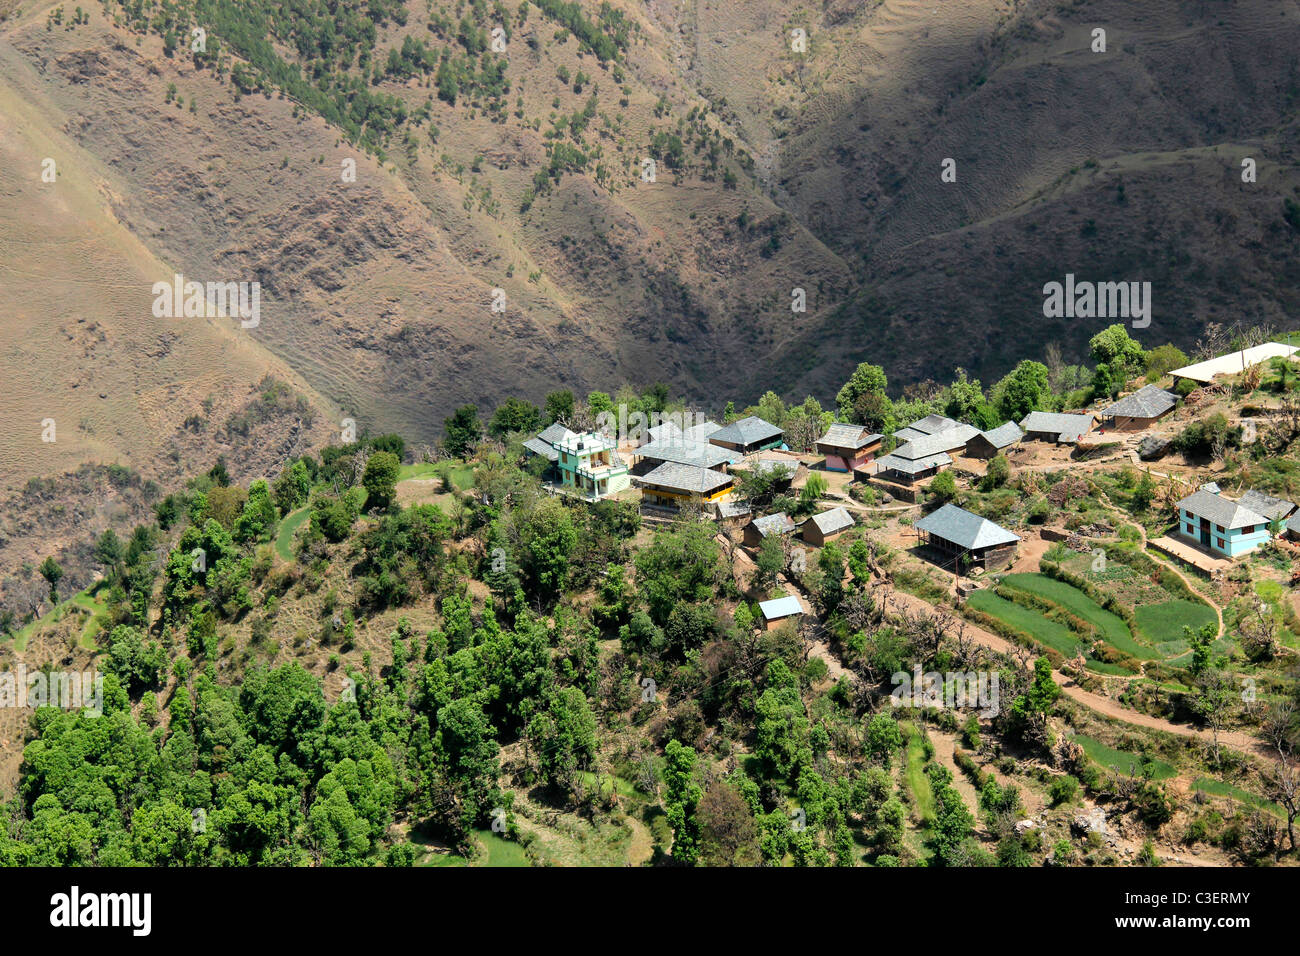 A view of a rural area in Manali, Himachal Pradesh,India, Stock Photo